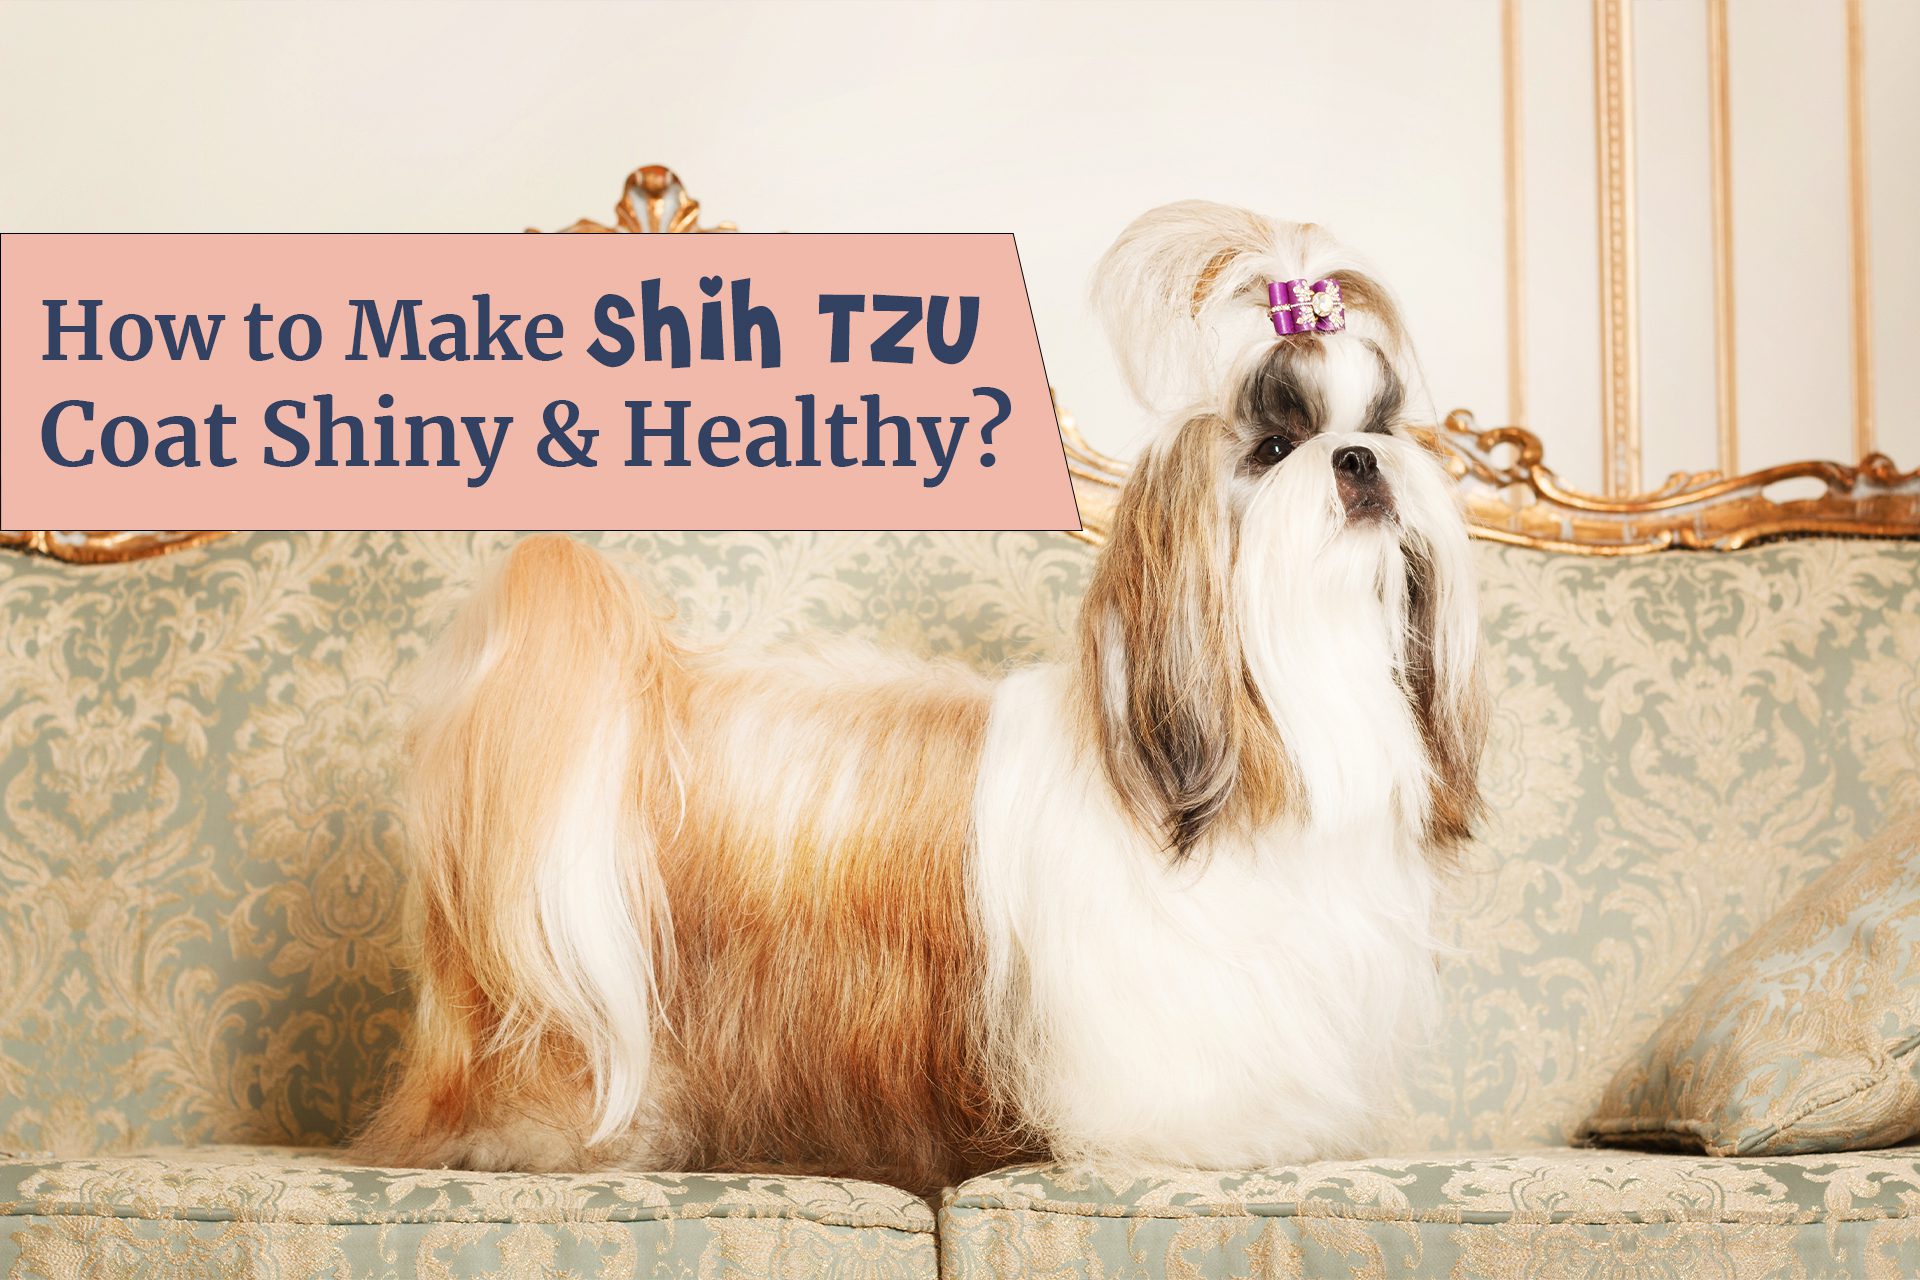 As a Shih Tzu owner, what can we do for Shih Tzu coat care? How to make it shiny and healthy? There are a few tips to make sure that your Shih Tzu's coat is shiny and healthy. Regular bathing, brushing, grooming, healthy diet and suppliments can help in making the Shih Tzu coat shiny, silky and healthy.